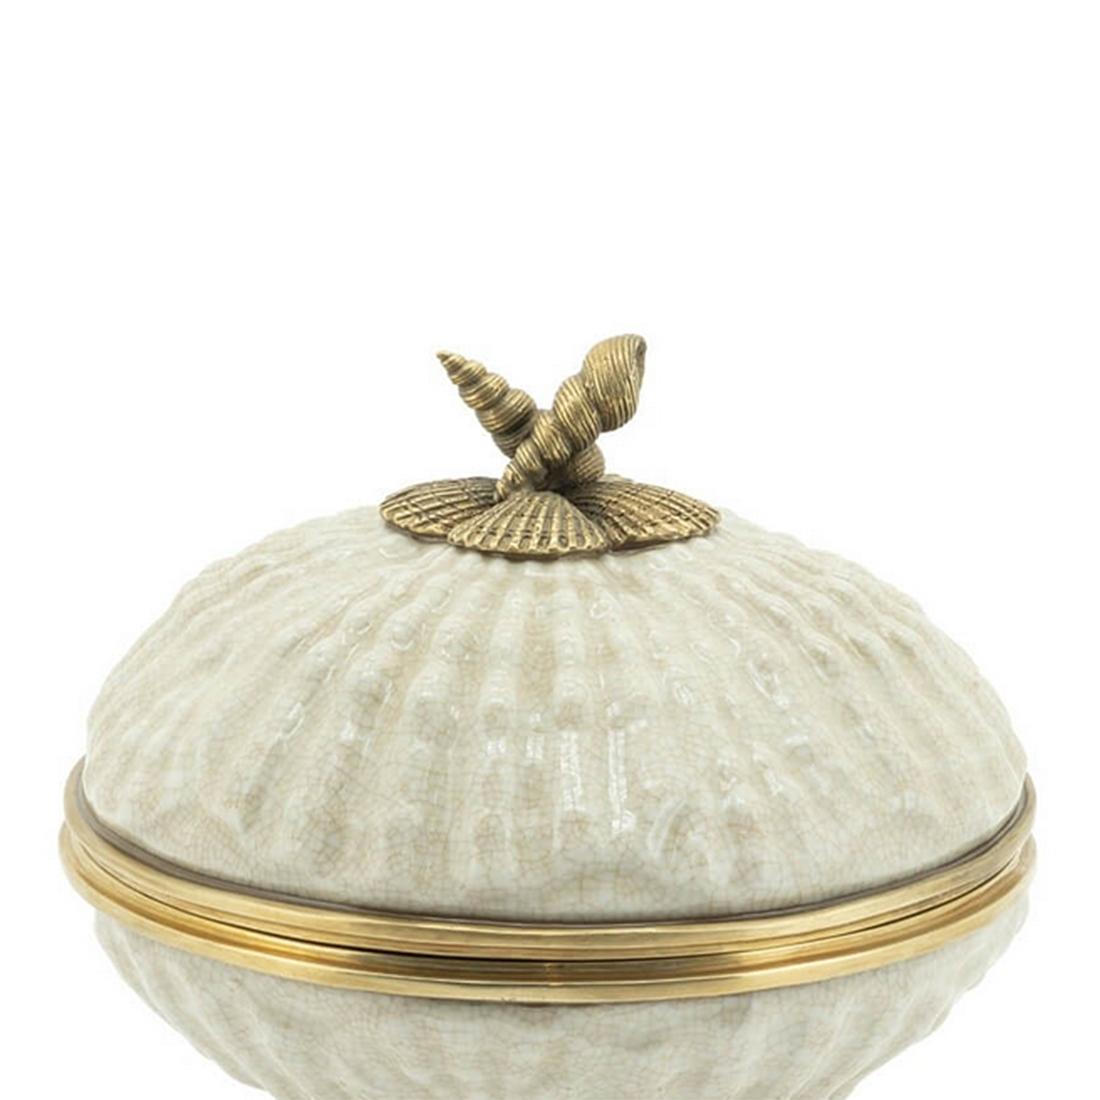 Box Shells in porcelain with porcelain 
lid. All details in solid bronze in antique finish.